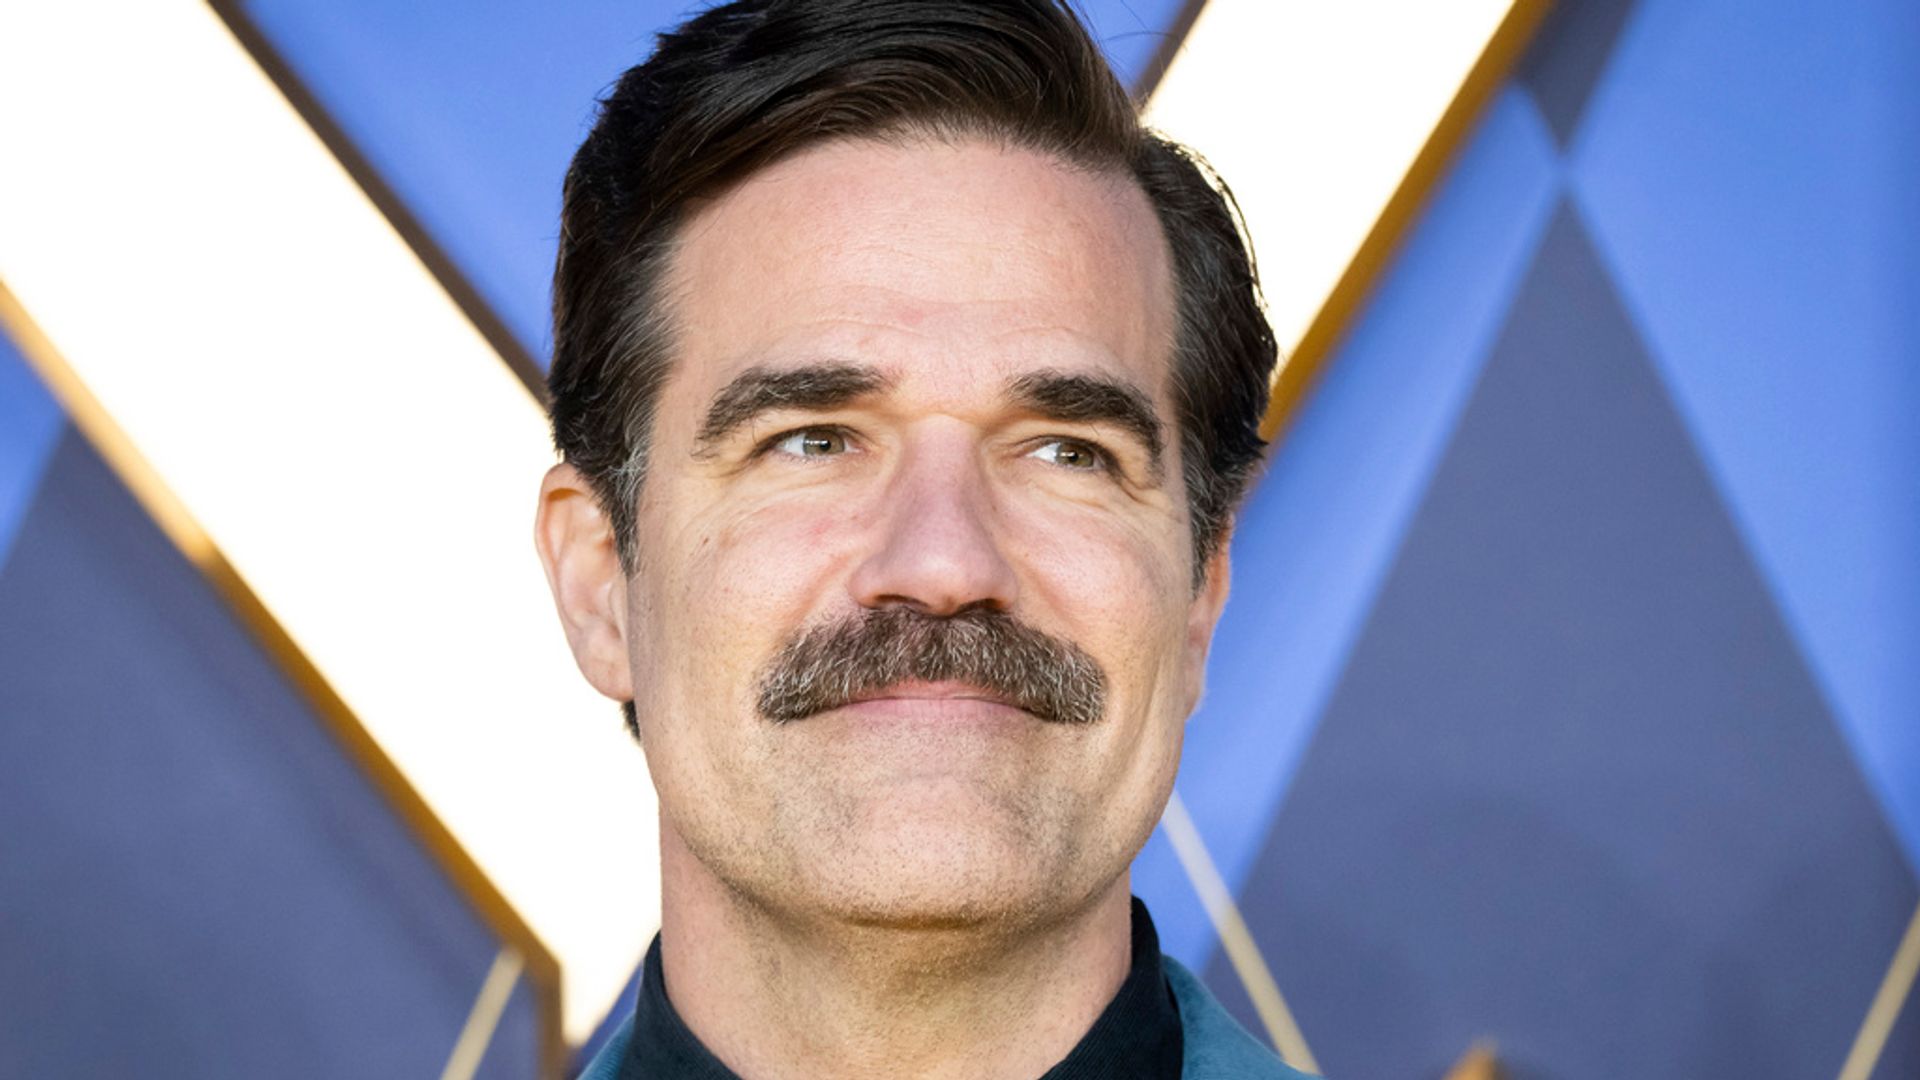 Comedian Rob Delaney says he wants to die in same room as his son